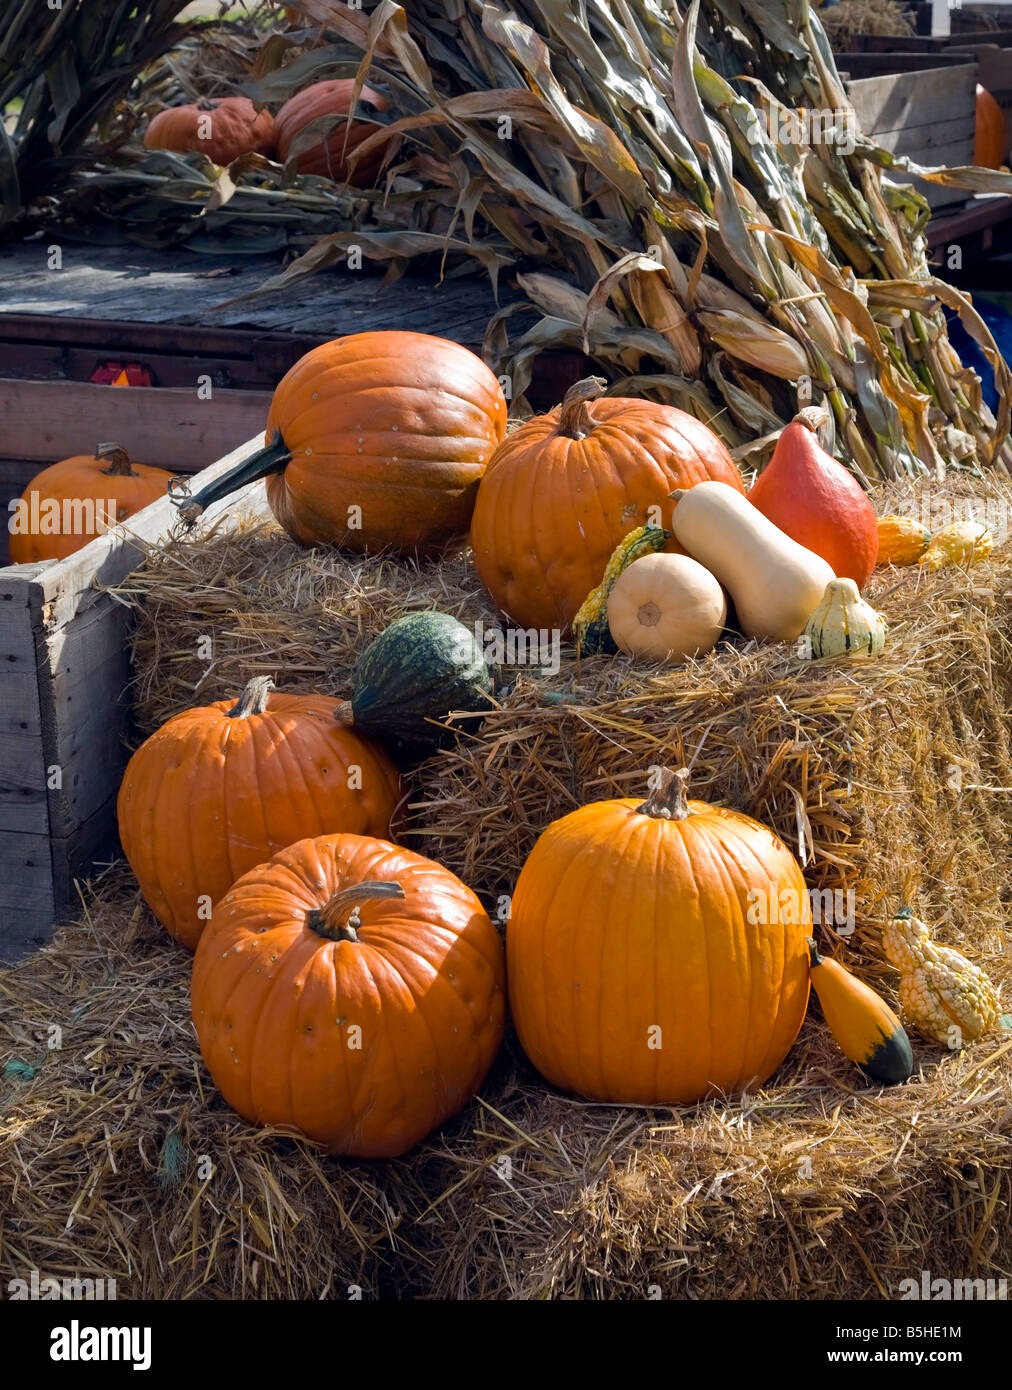 Display of Pumpkin on display for the Celebration of Thanksgiving in North America Stock Photo